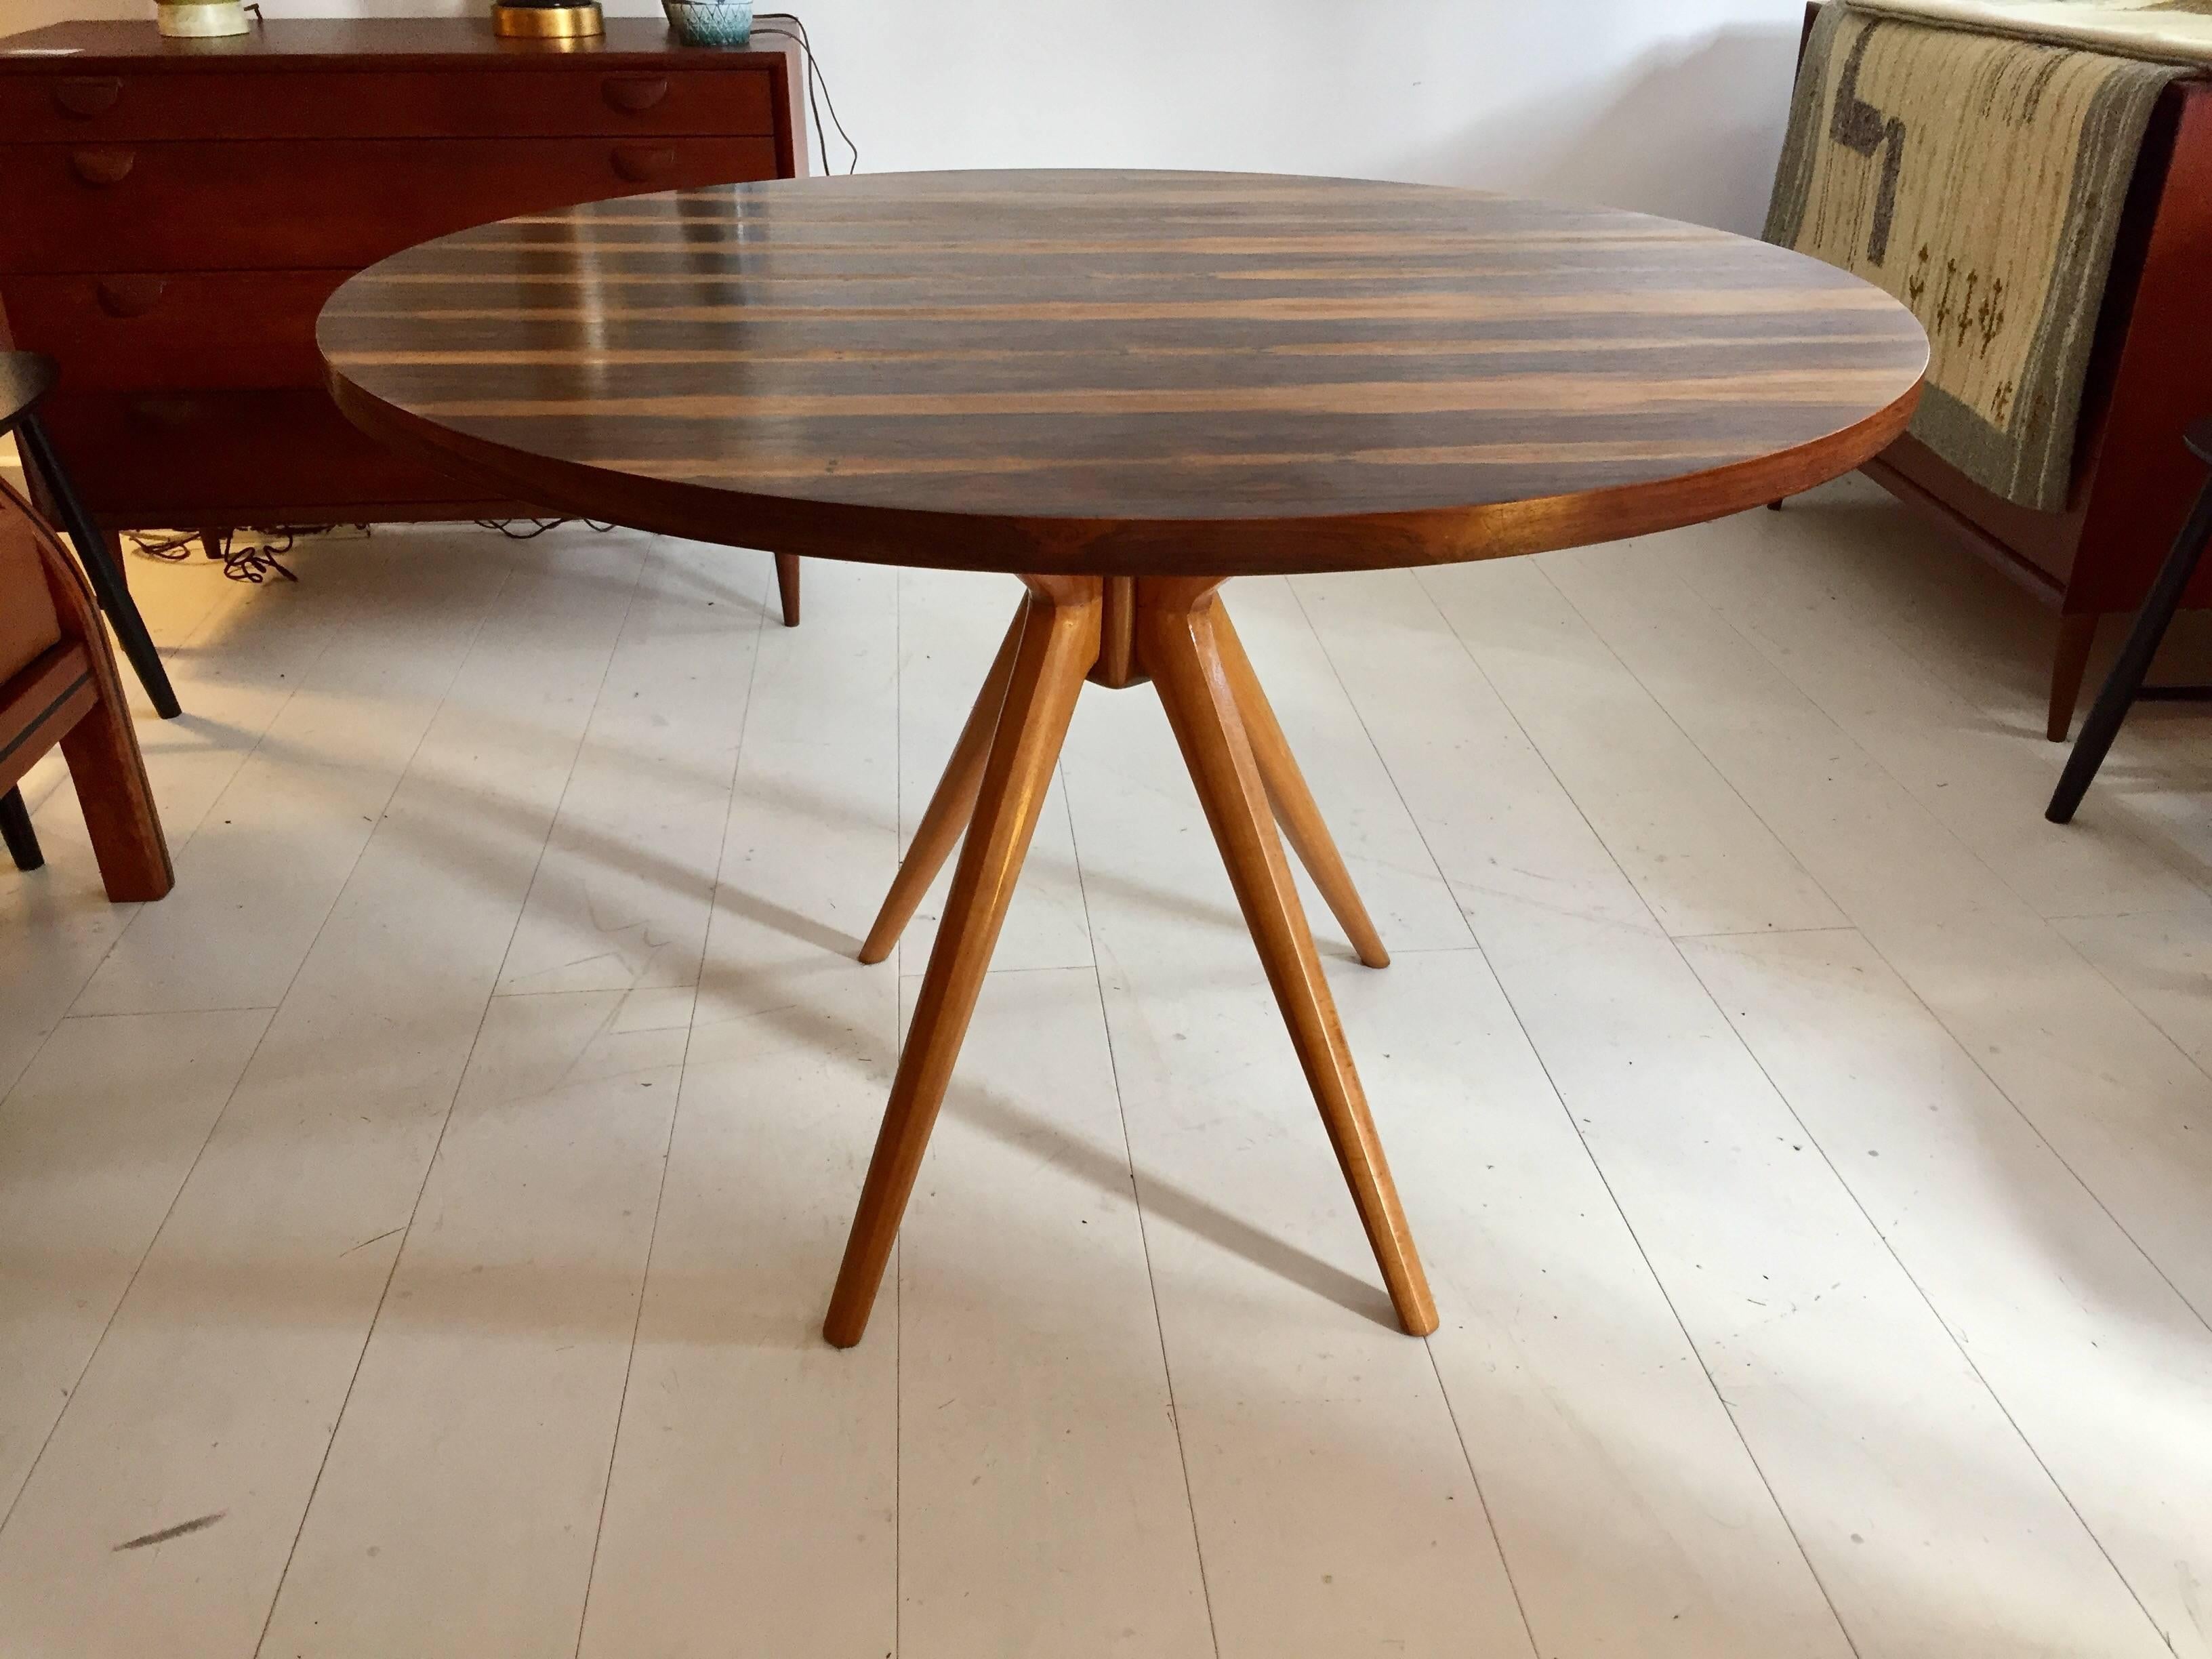 Wonderful example of Italian organic design from the early 1950s. Sculpted four-legged maple pedestal base with highly figured bookmatched rosewood top. Retains the Tecno label.